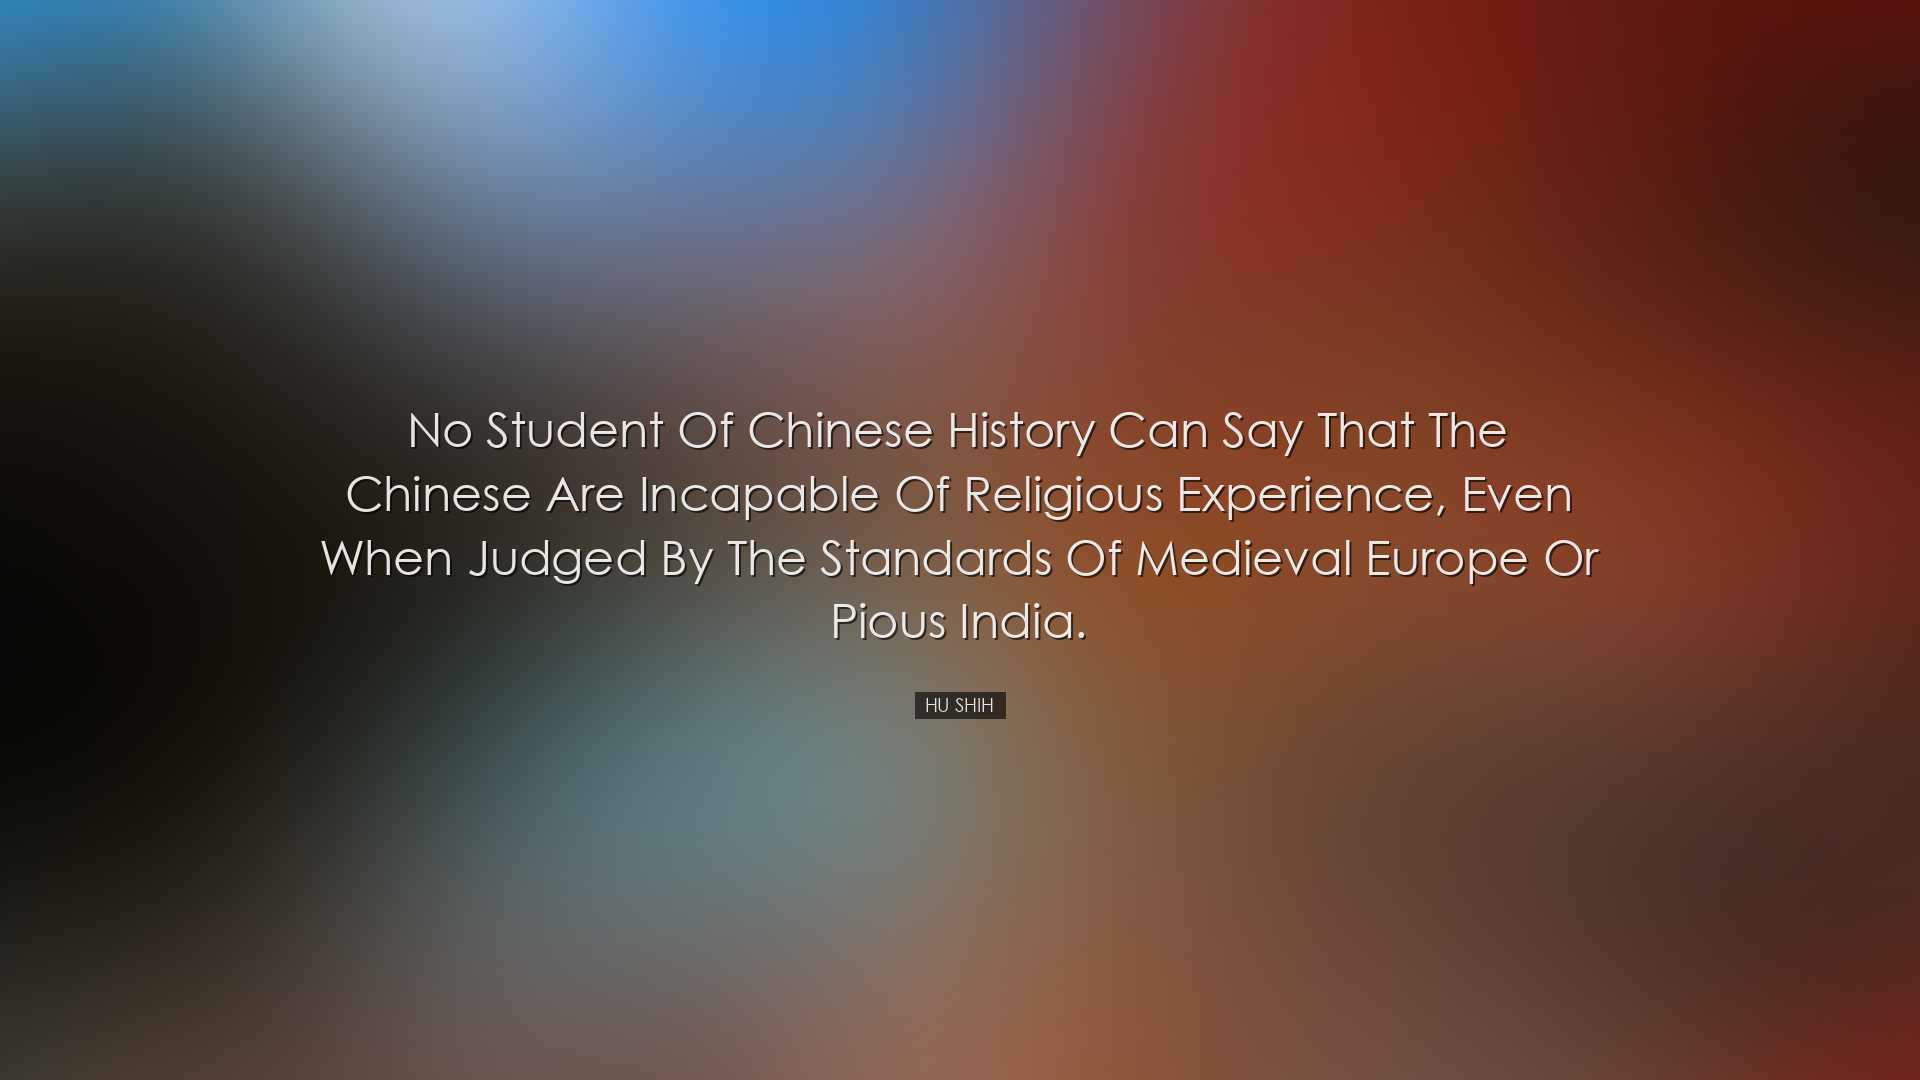 No student of Chinese history can say that the Chinese are incapab